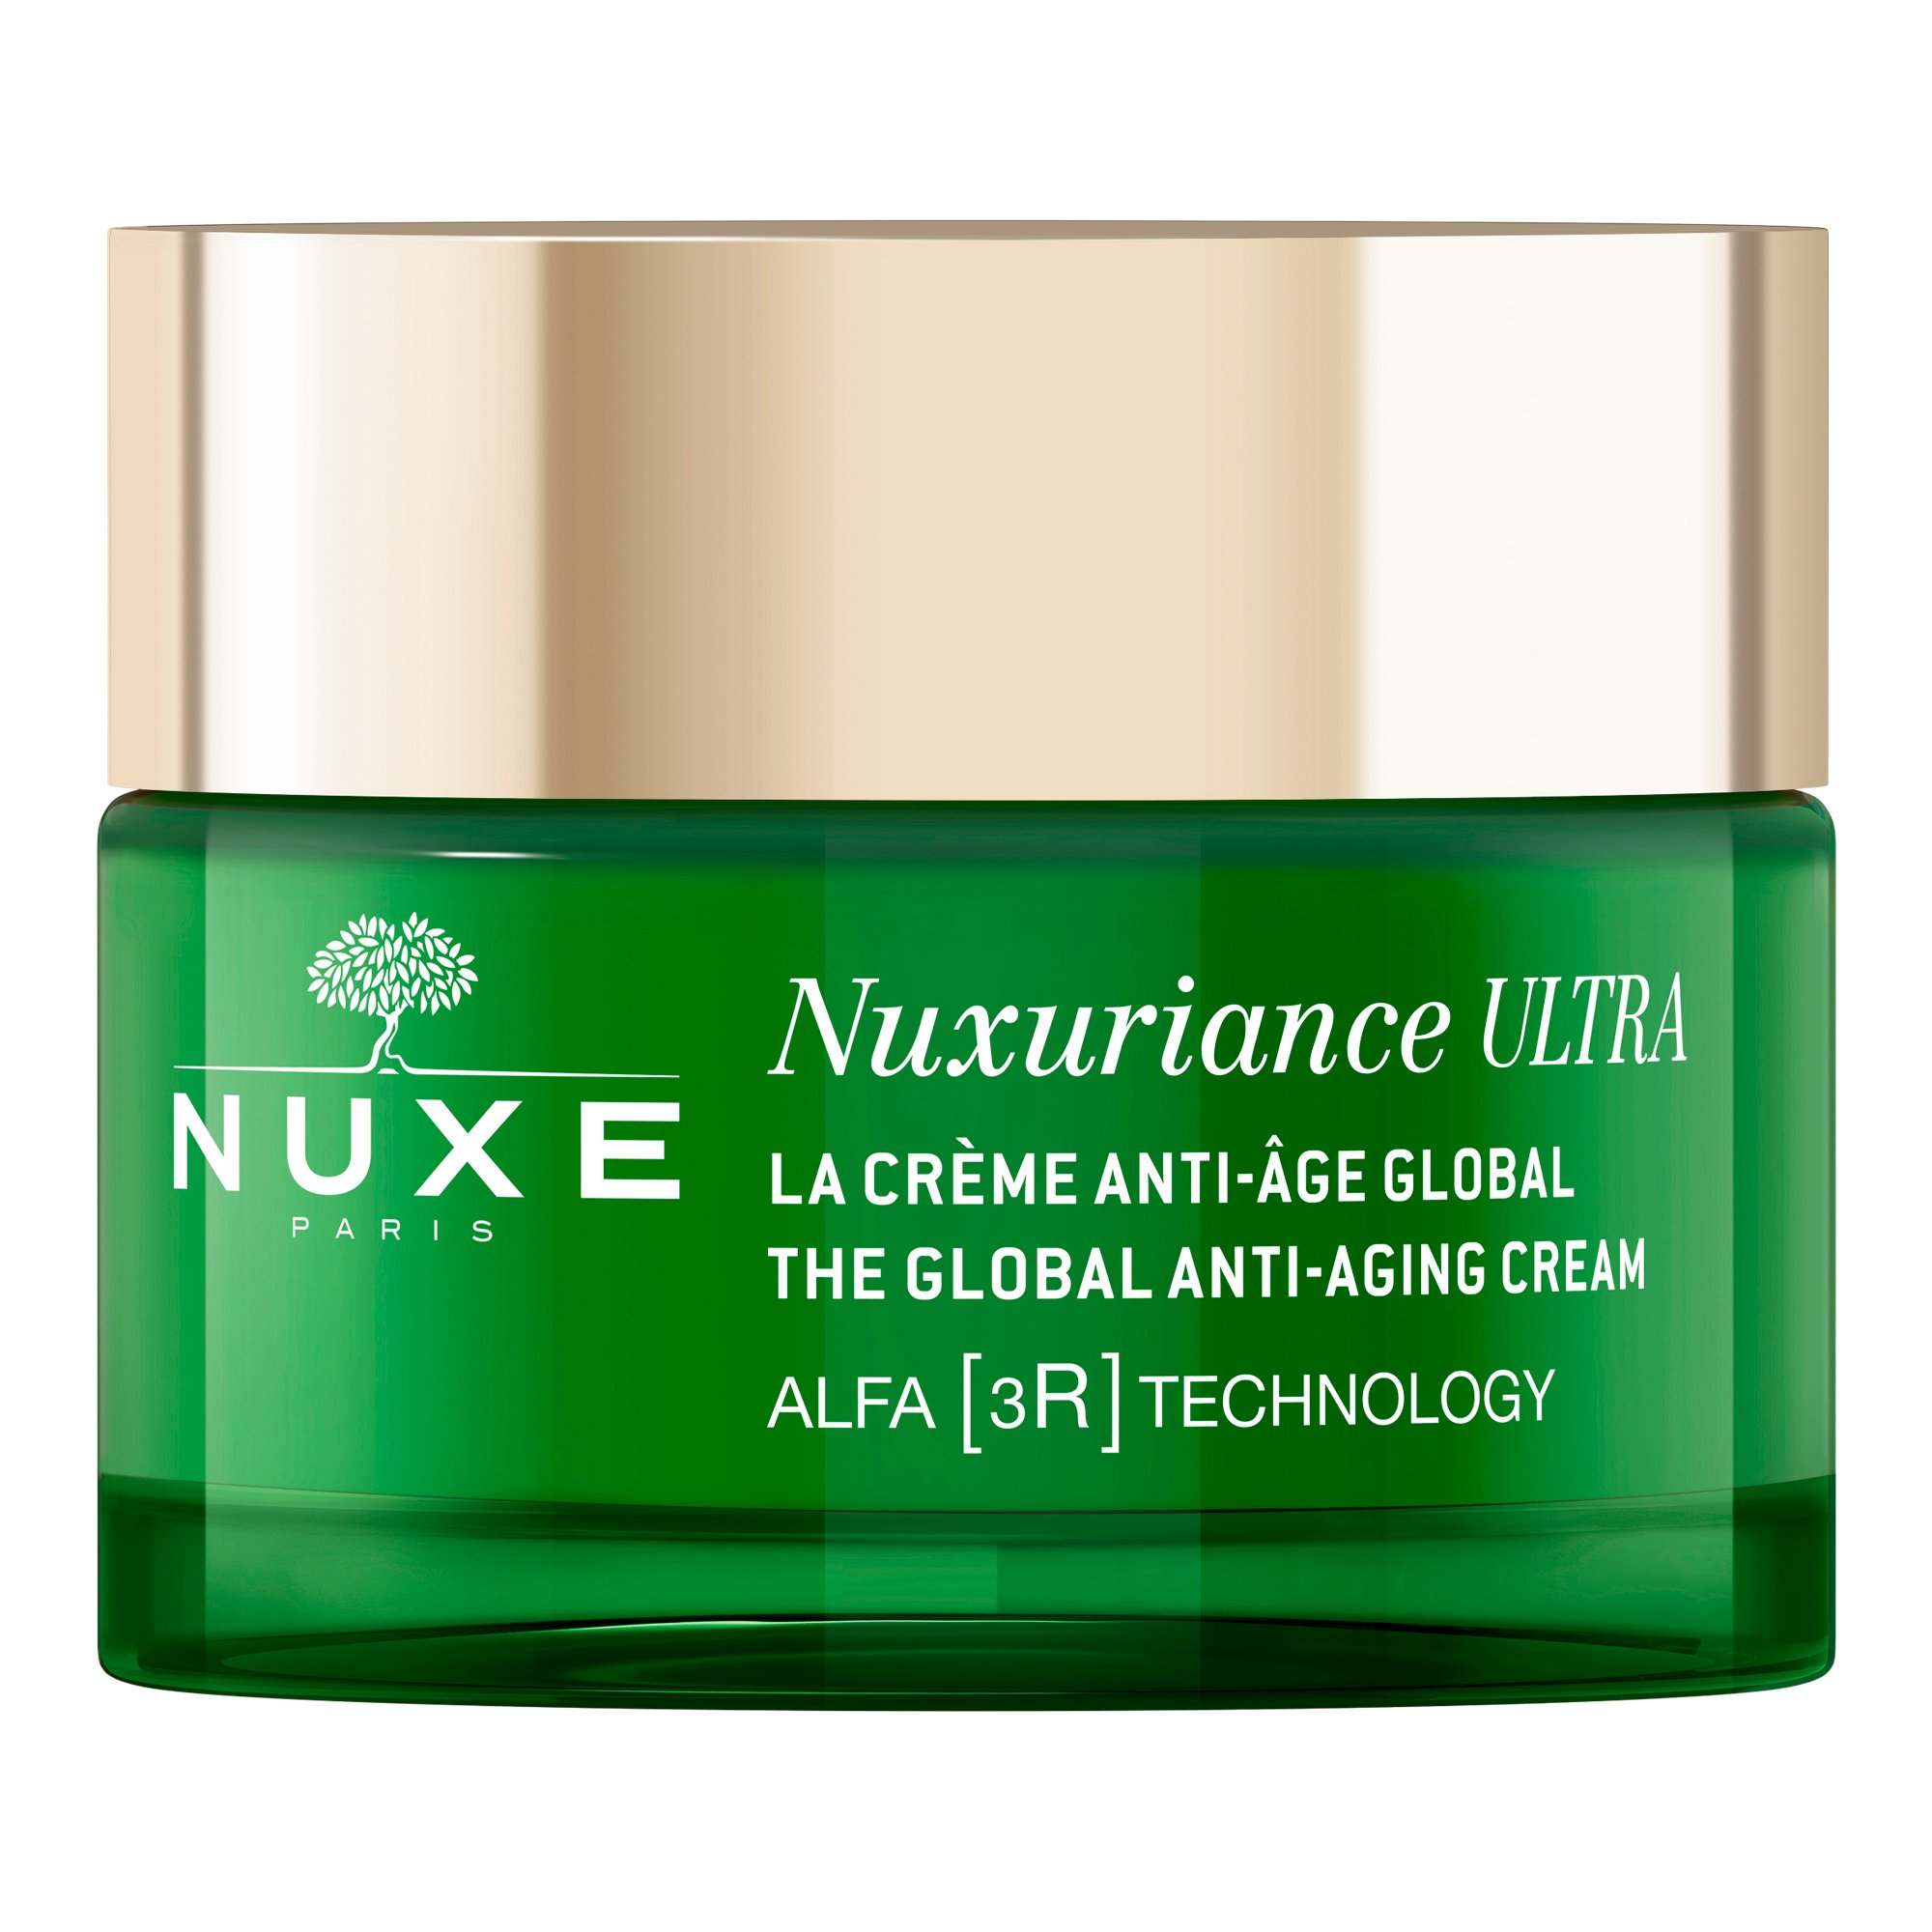 Nuxe - Nuxuriance Ultra - Day Cream - All Sin Type 50 ml